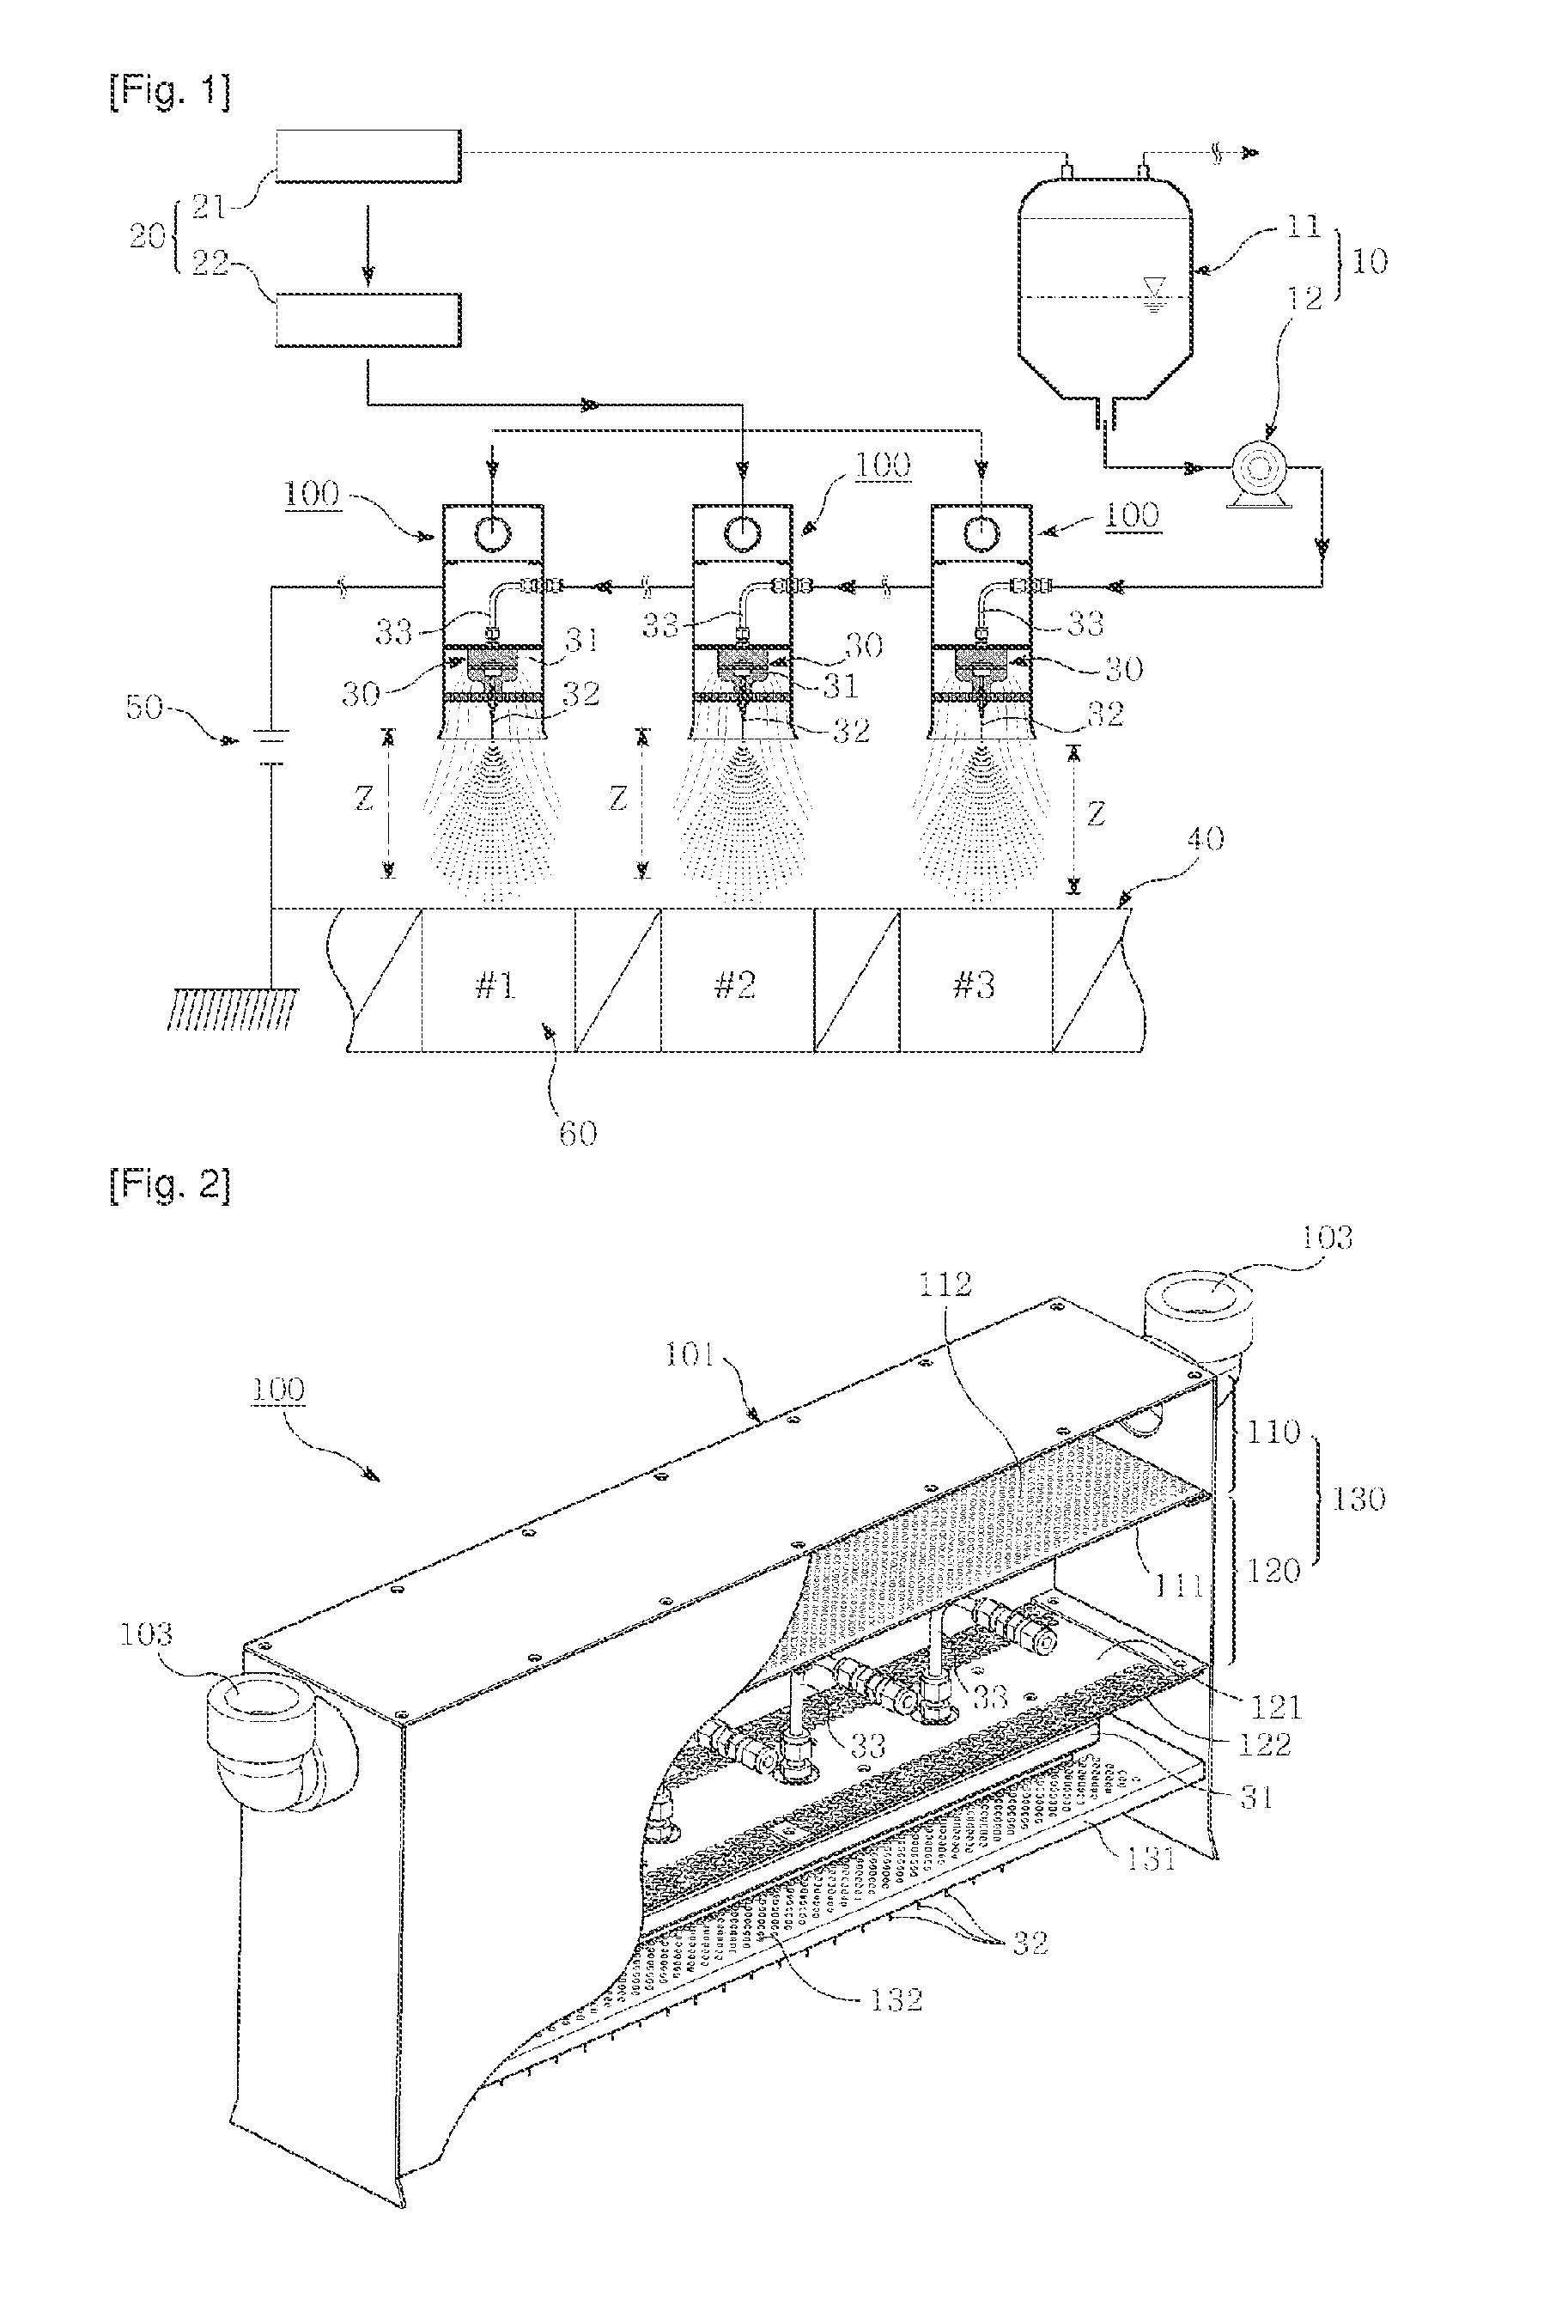 Electrospinning apparatus for producing nanofibres and capable of adjusting the temperature and humidity of a spinning zone